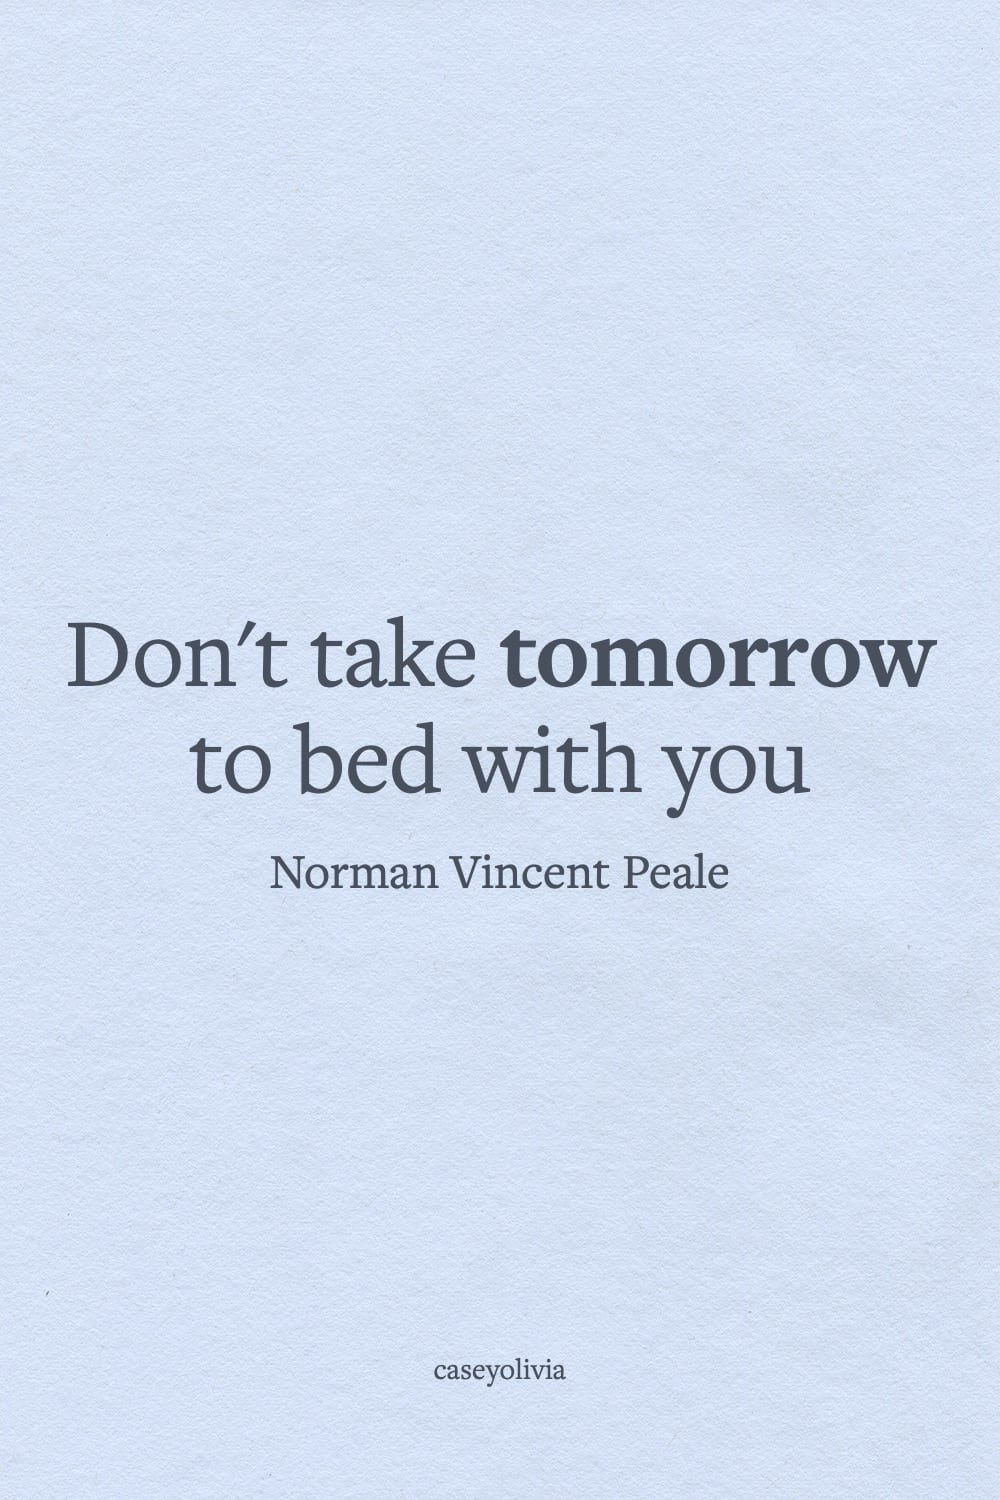 dont take tomorrow to bed with you short caption